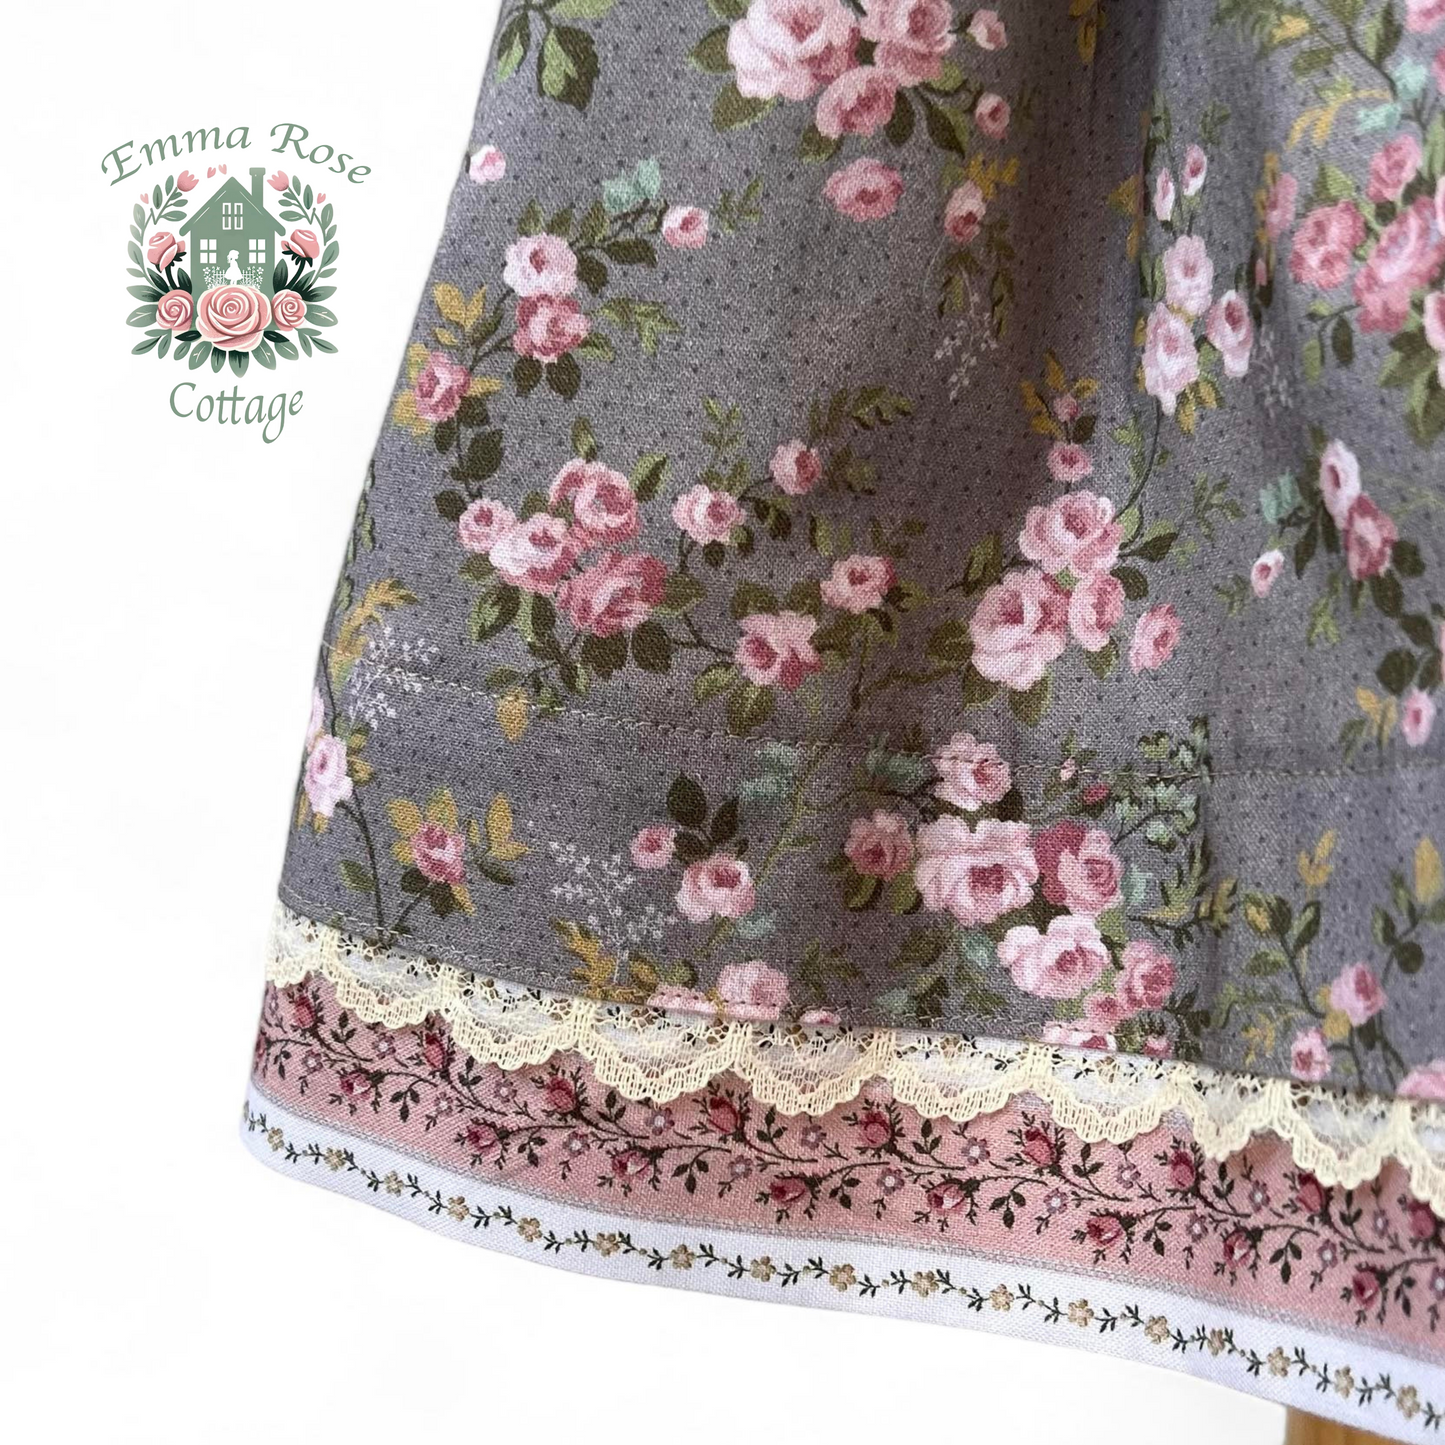 Vintage Rose - Size 4T Ready to Ship, perfect for brunch - 1 Made to orders is available